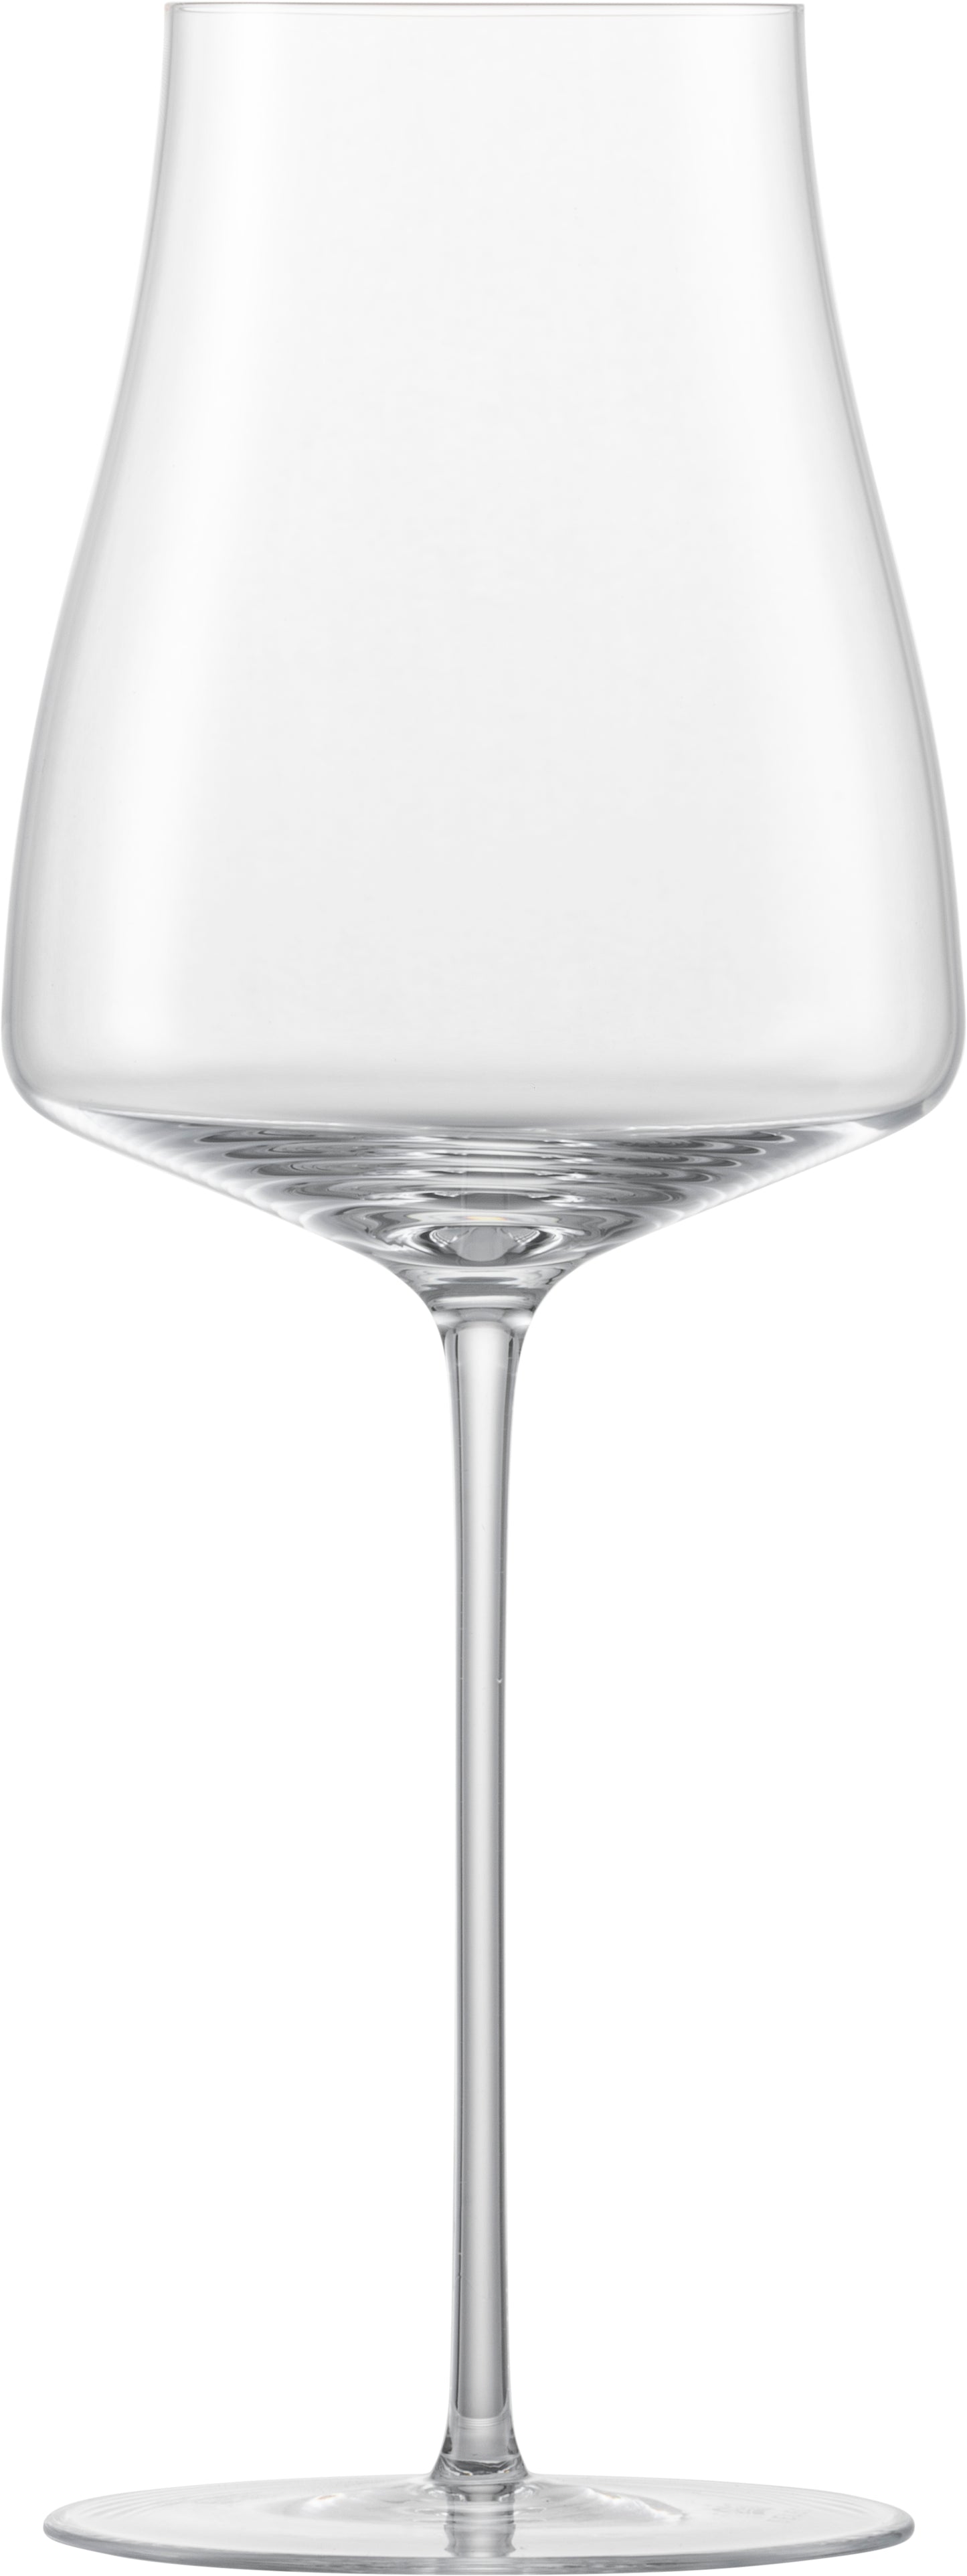 The Moments Rioja Red Wine Glass, Set of 2